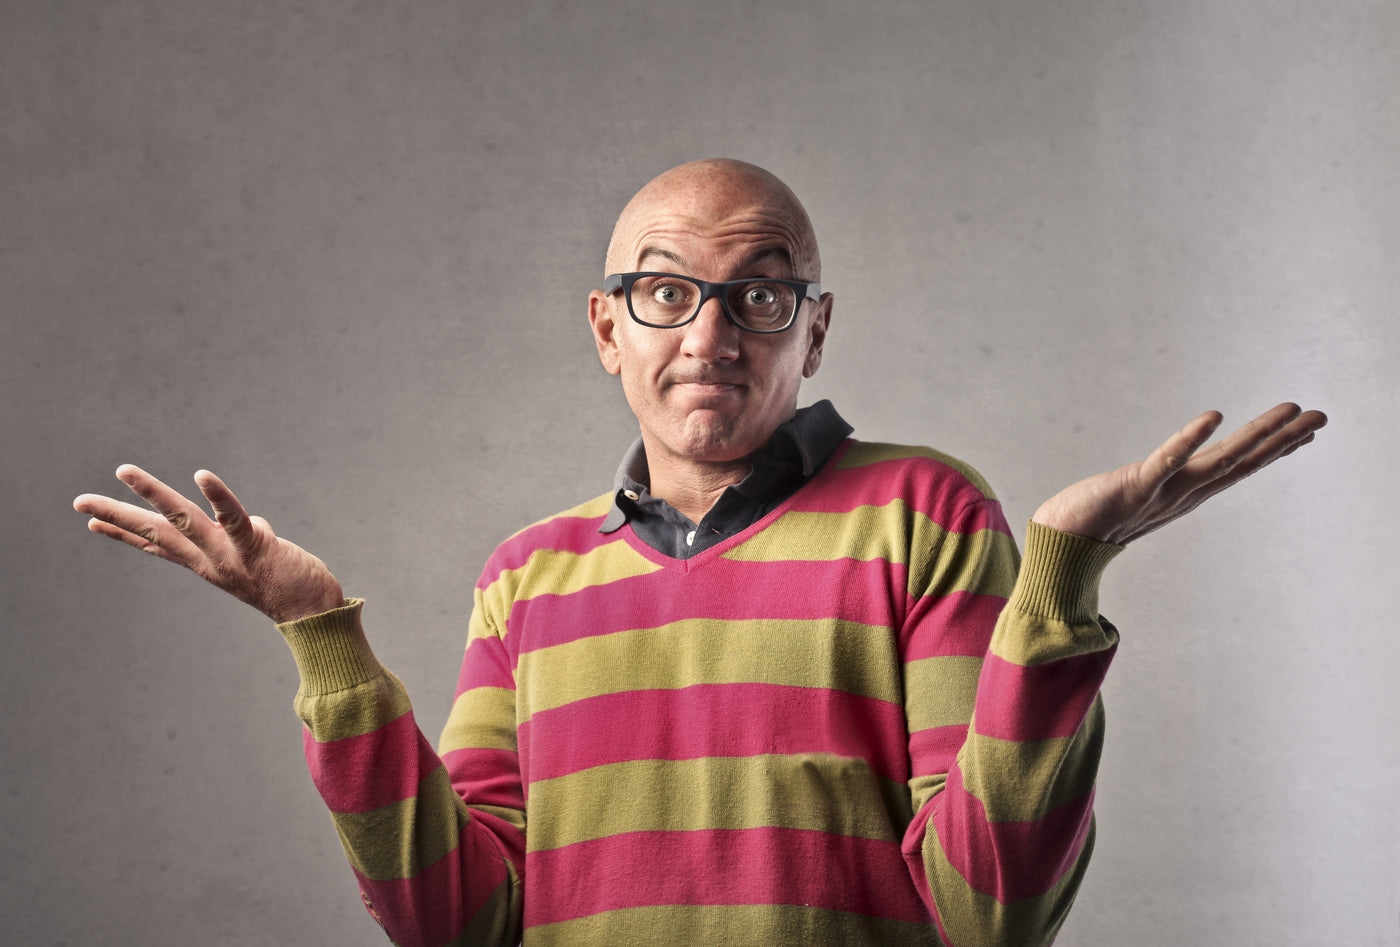 Bald man wearing glasses with his hands up implying confusion.